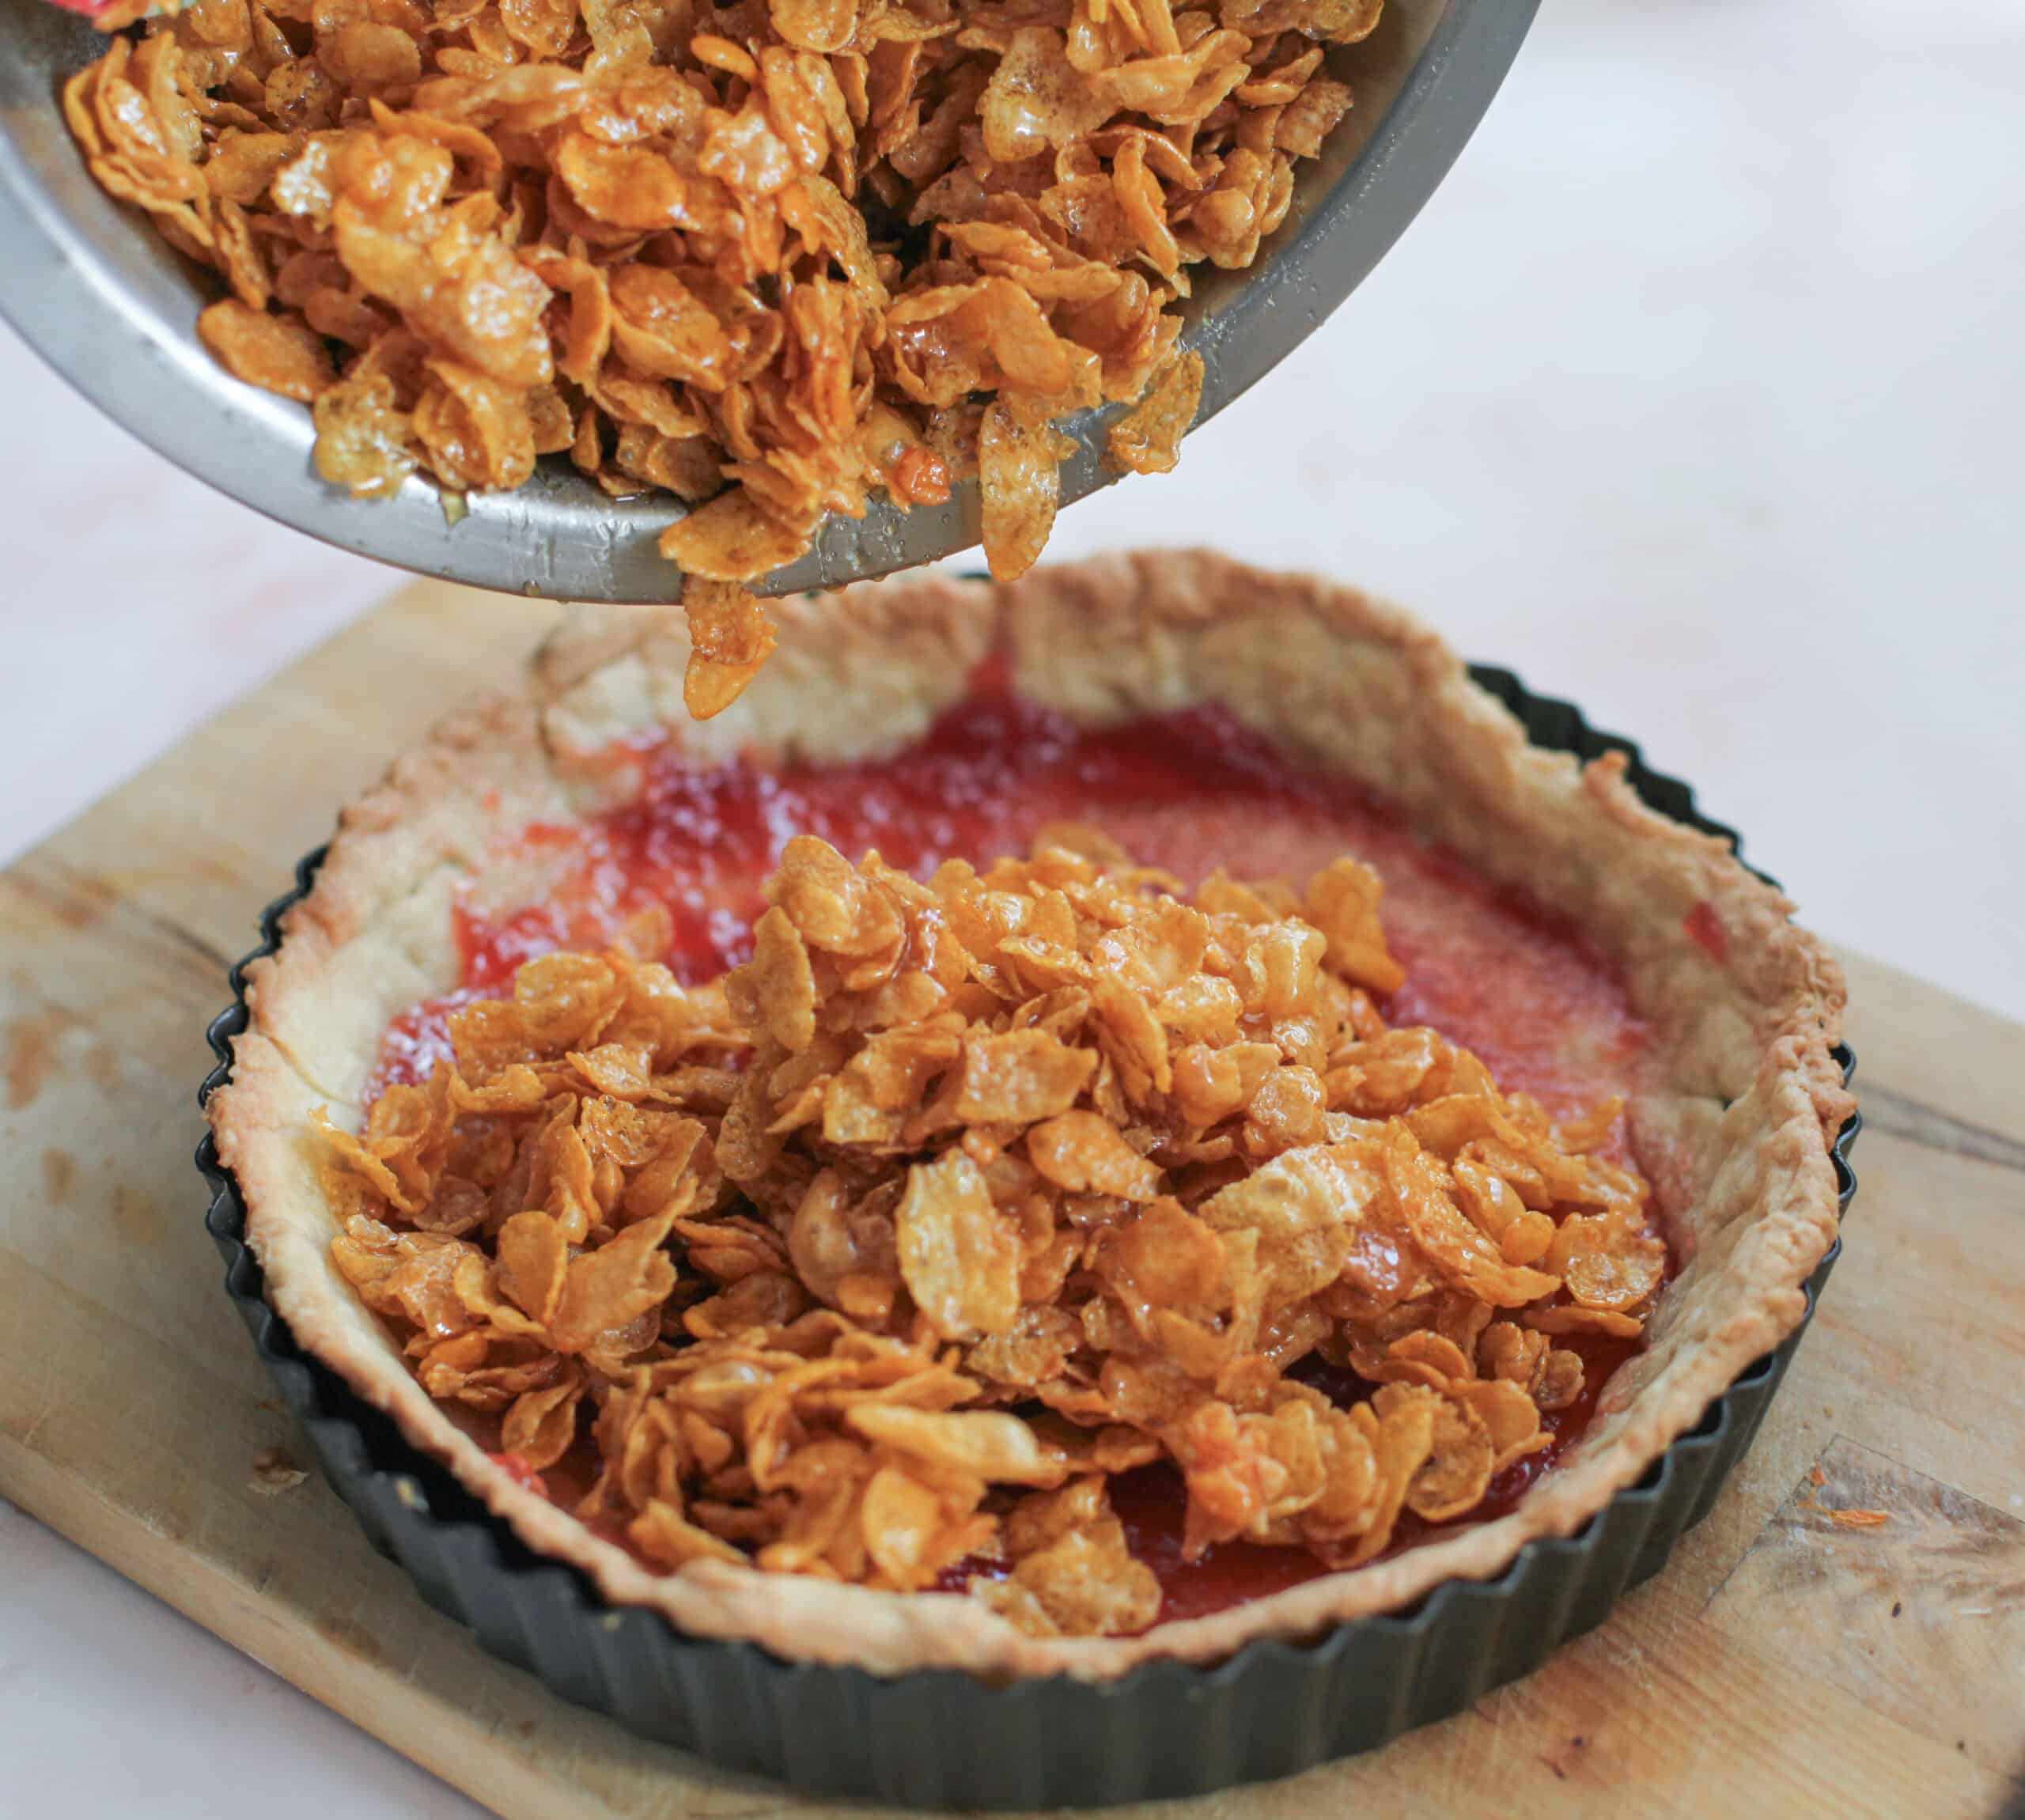 Spooning combined cornflake mixture into the pie crust.